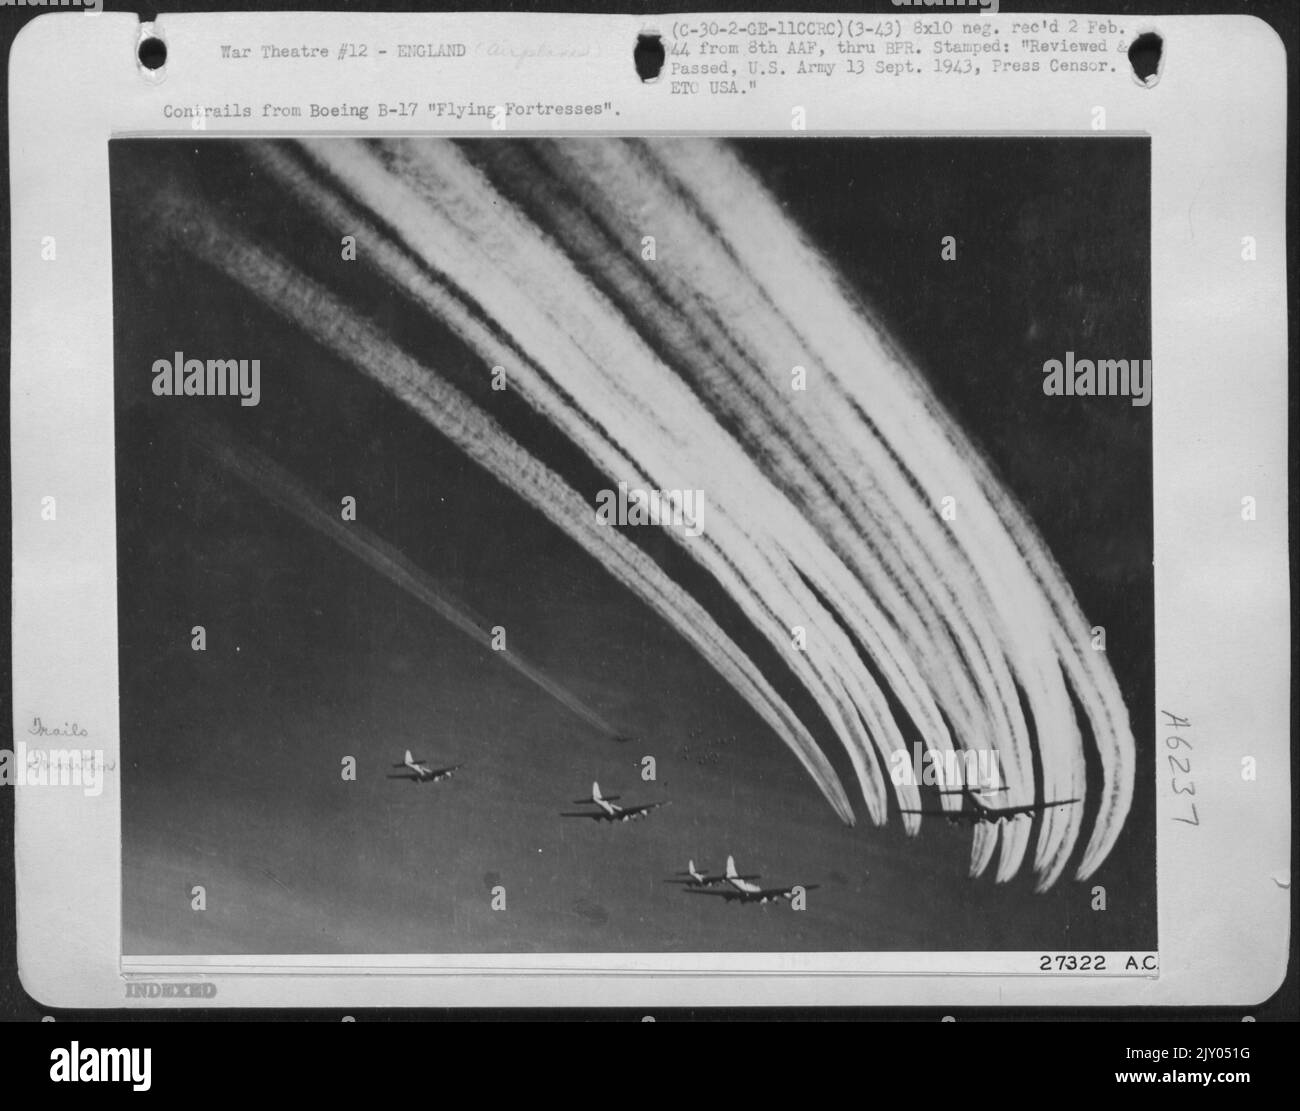 Contrails from Boeing B-17 "Flying ofrtresses". Stock Photo